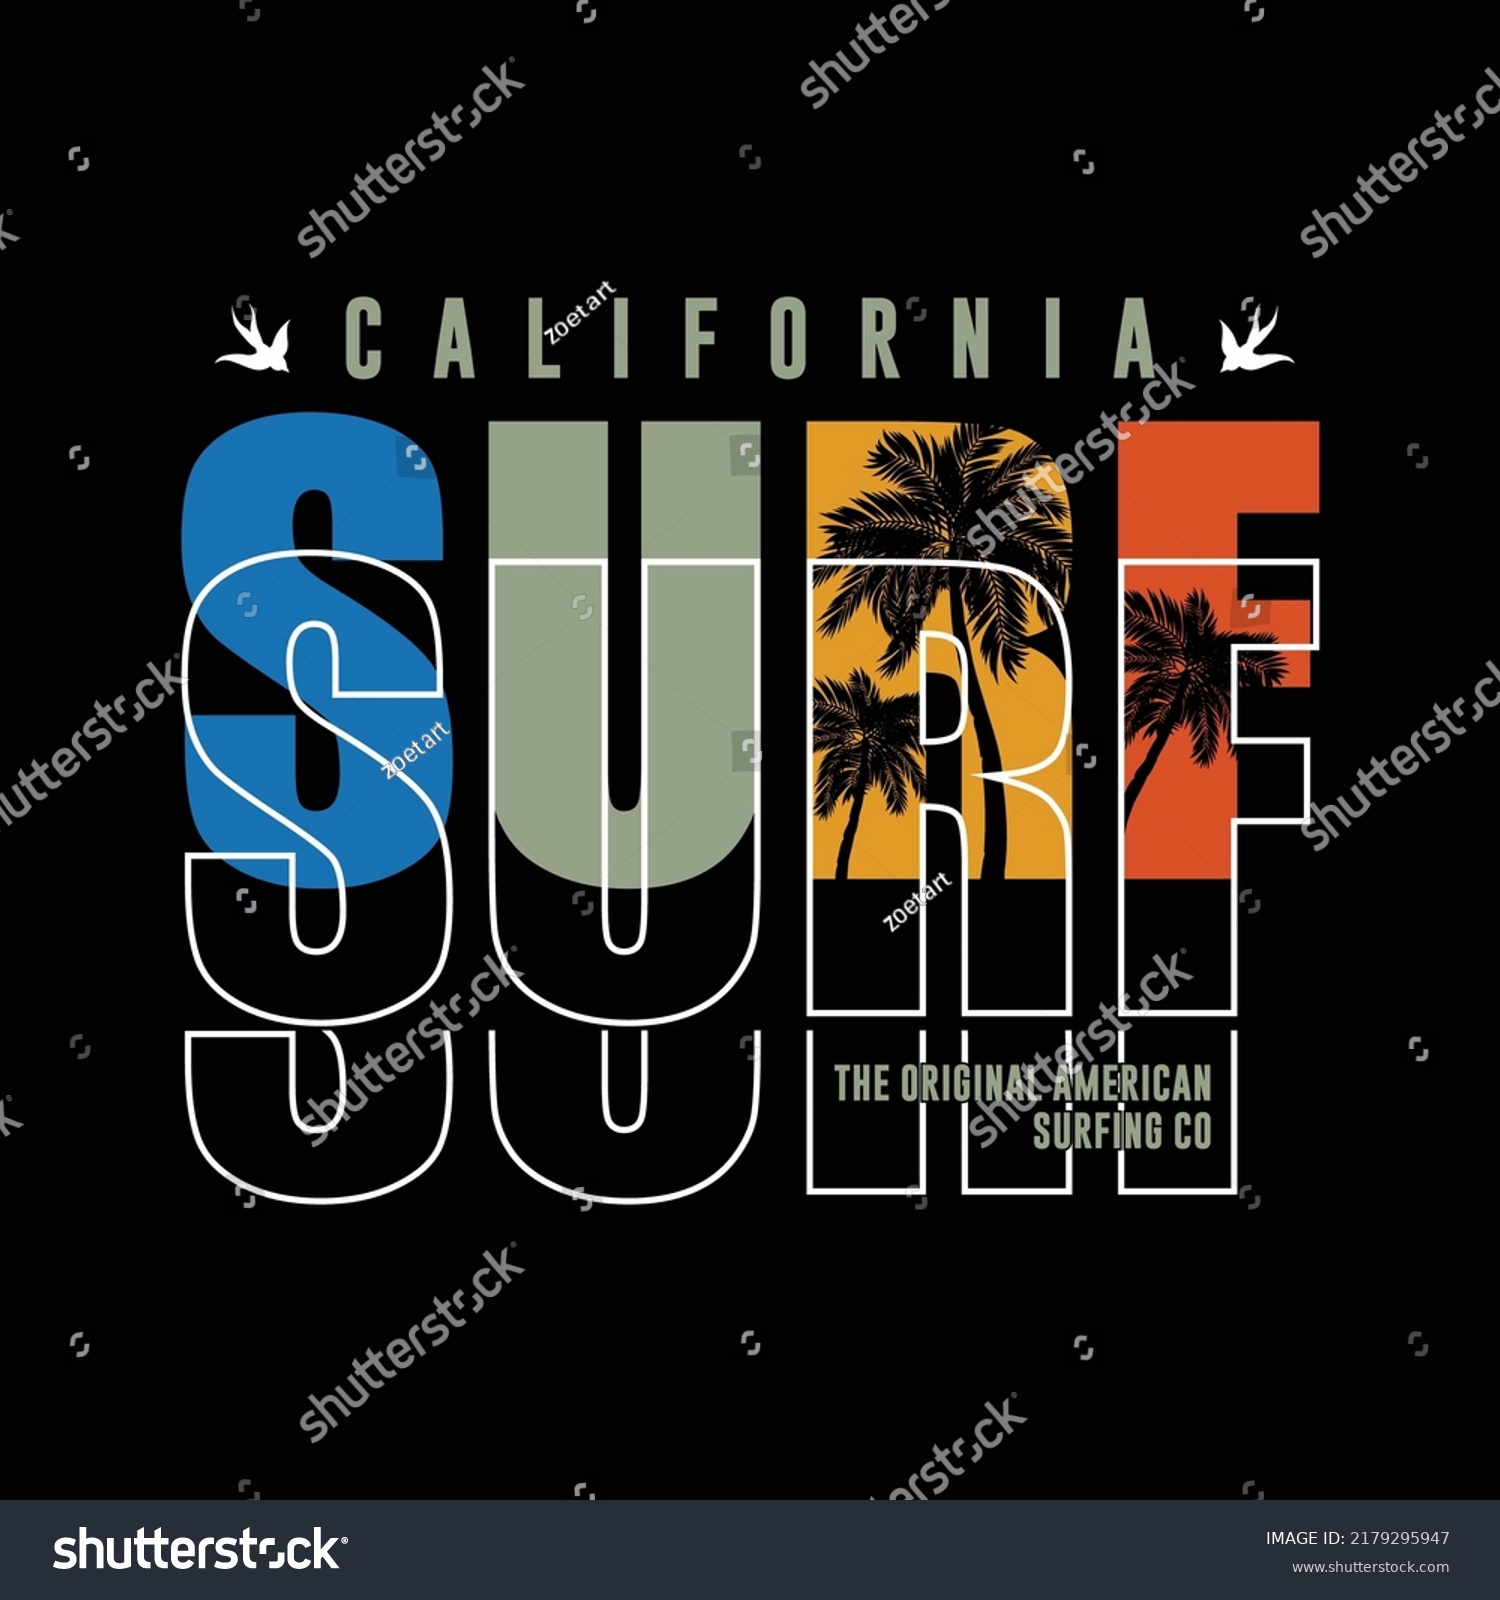 Vector Illustration On Theme Surfing Surf Stock Vector (Royalty Free ...